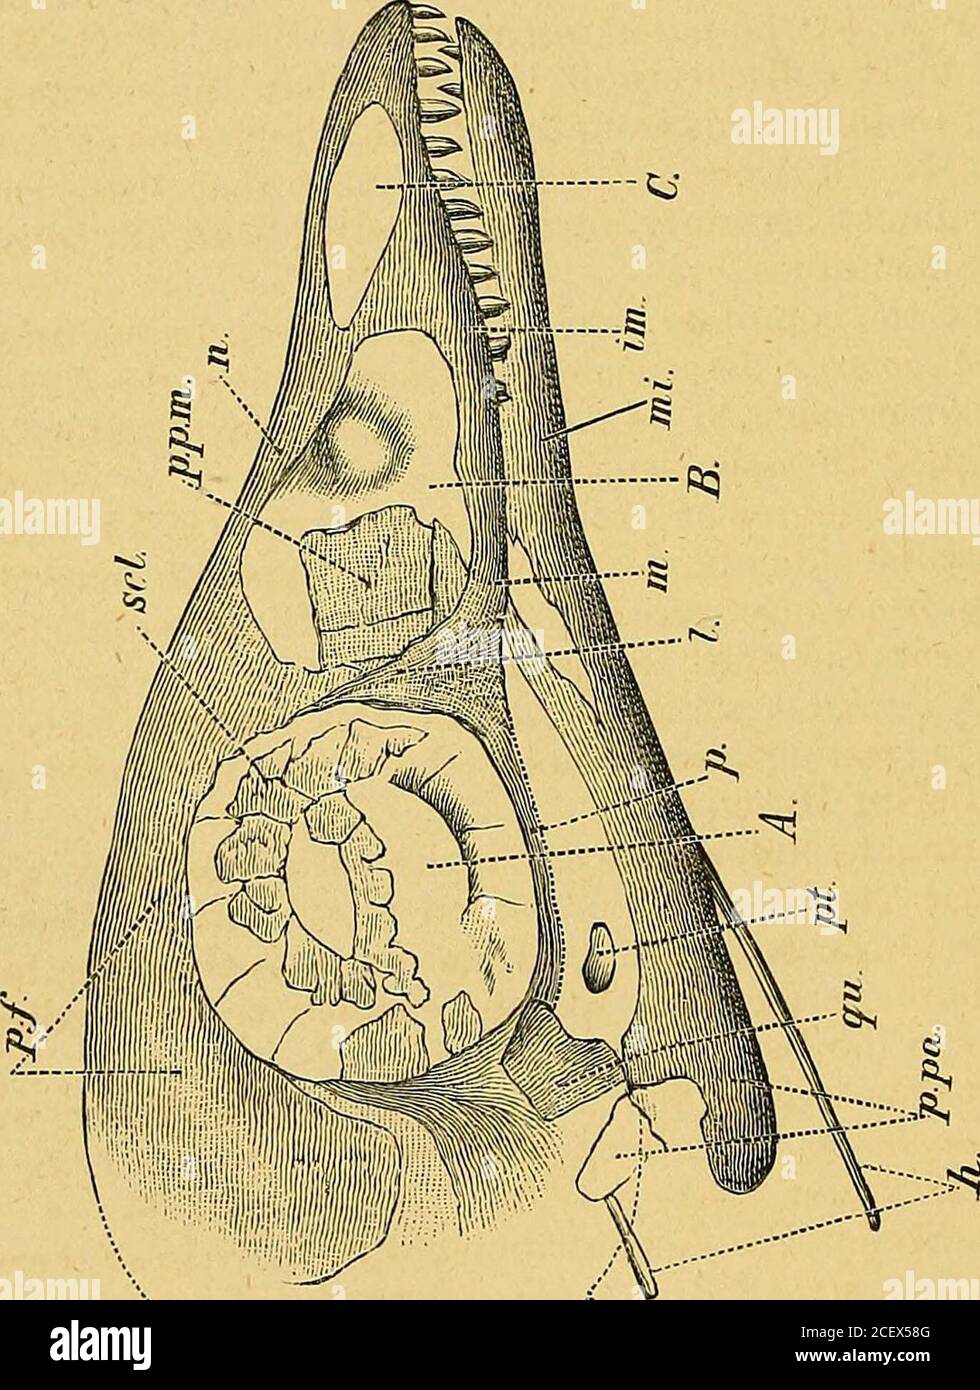 . Geological magazine. logists another fine sectionof these interesting: rocks. I^ IB ^TI IB V7 S. The Berlin Arch^opteryx. (PLATE XIV.) I.—Ueber Arch^opteryx von W. Dames, Palaeontologische Abhandlungen, zweiter Band, Heft 3. 4to. pp. 119—196. Mit, 1 Tafel und 5 Holzschnitten. (Berlin, 1884.)rjlHE announcement in 1862^ of the discovery of a nearly entire L skeleton of a most remarkable long-tailed Bird, clothed withfeathers, in the Lithographic Stone of Pappenheim in Bavaria, namedby Prof. Owen Archceopteryx macrura, produced a most profoundsensation amongst biologists generally. A single fea Stock Photo